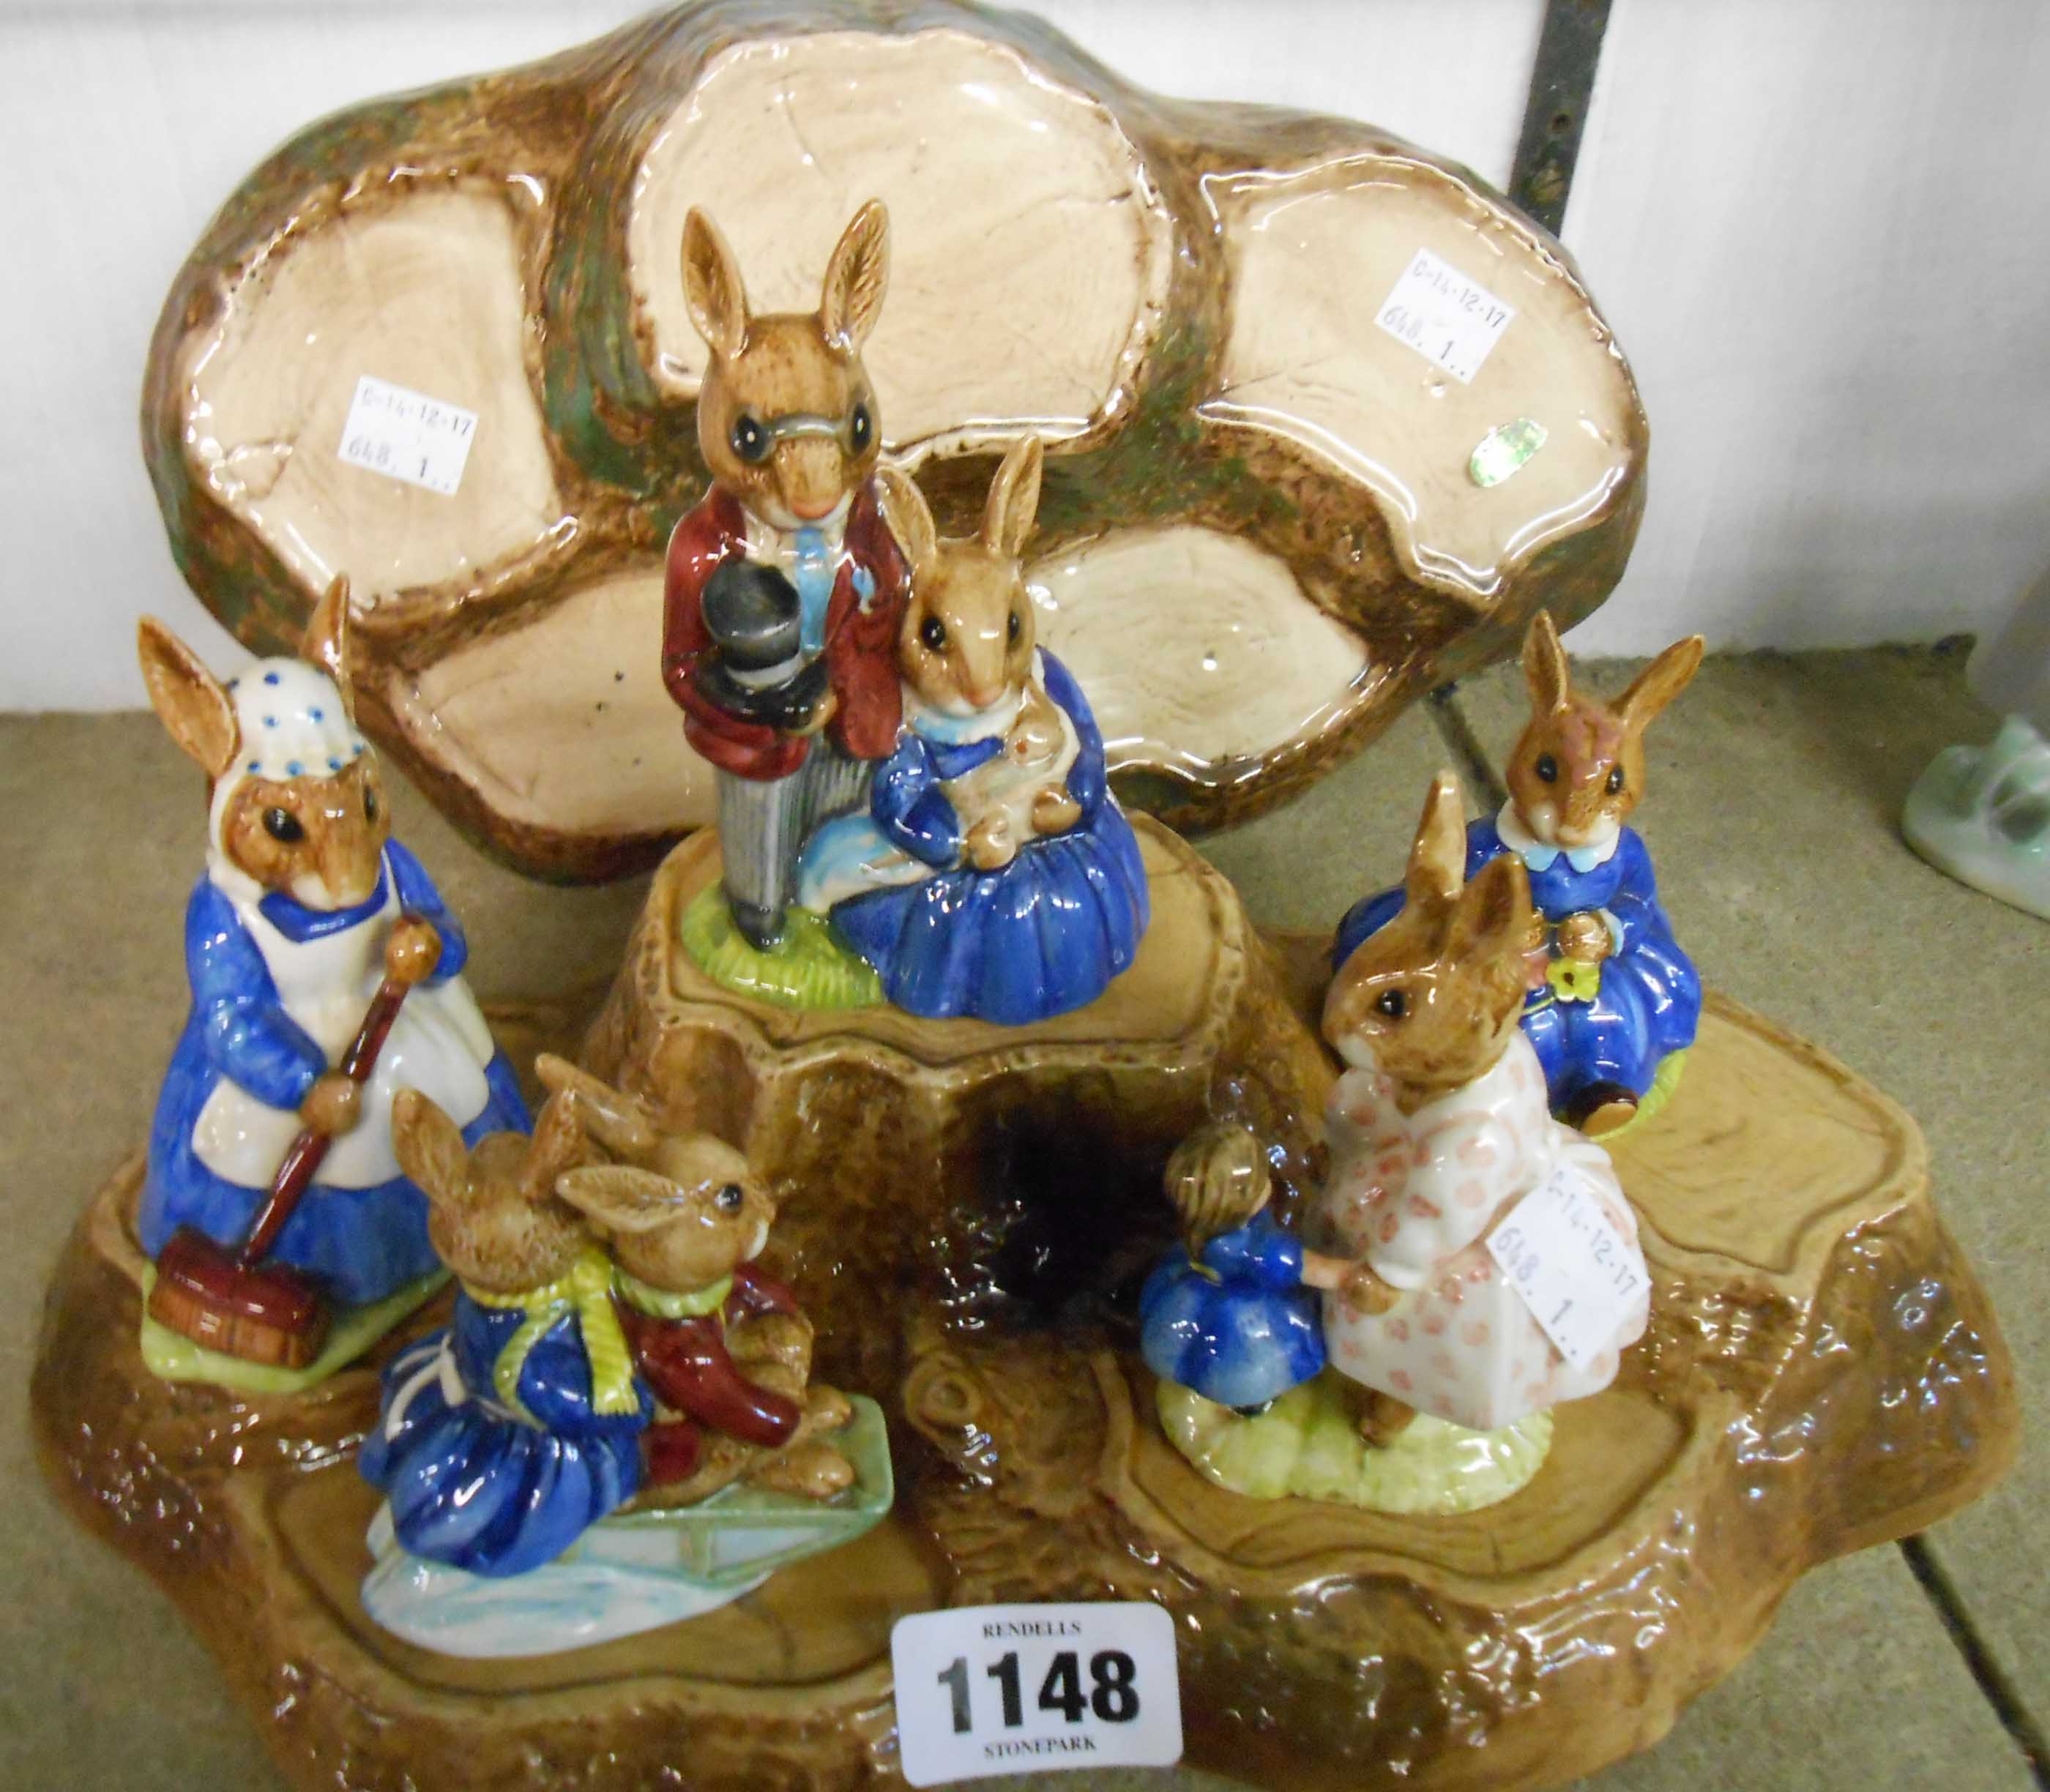 Five Royal Doulton Bunnykins figures on a tree trunk pattern stand and a Beswick stand similar